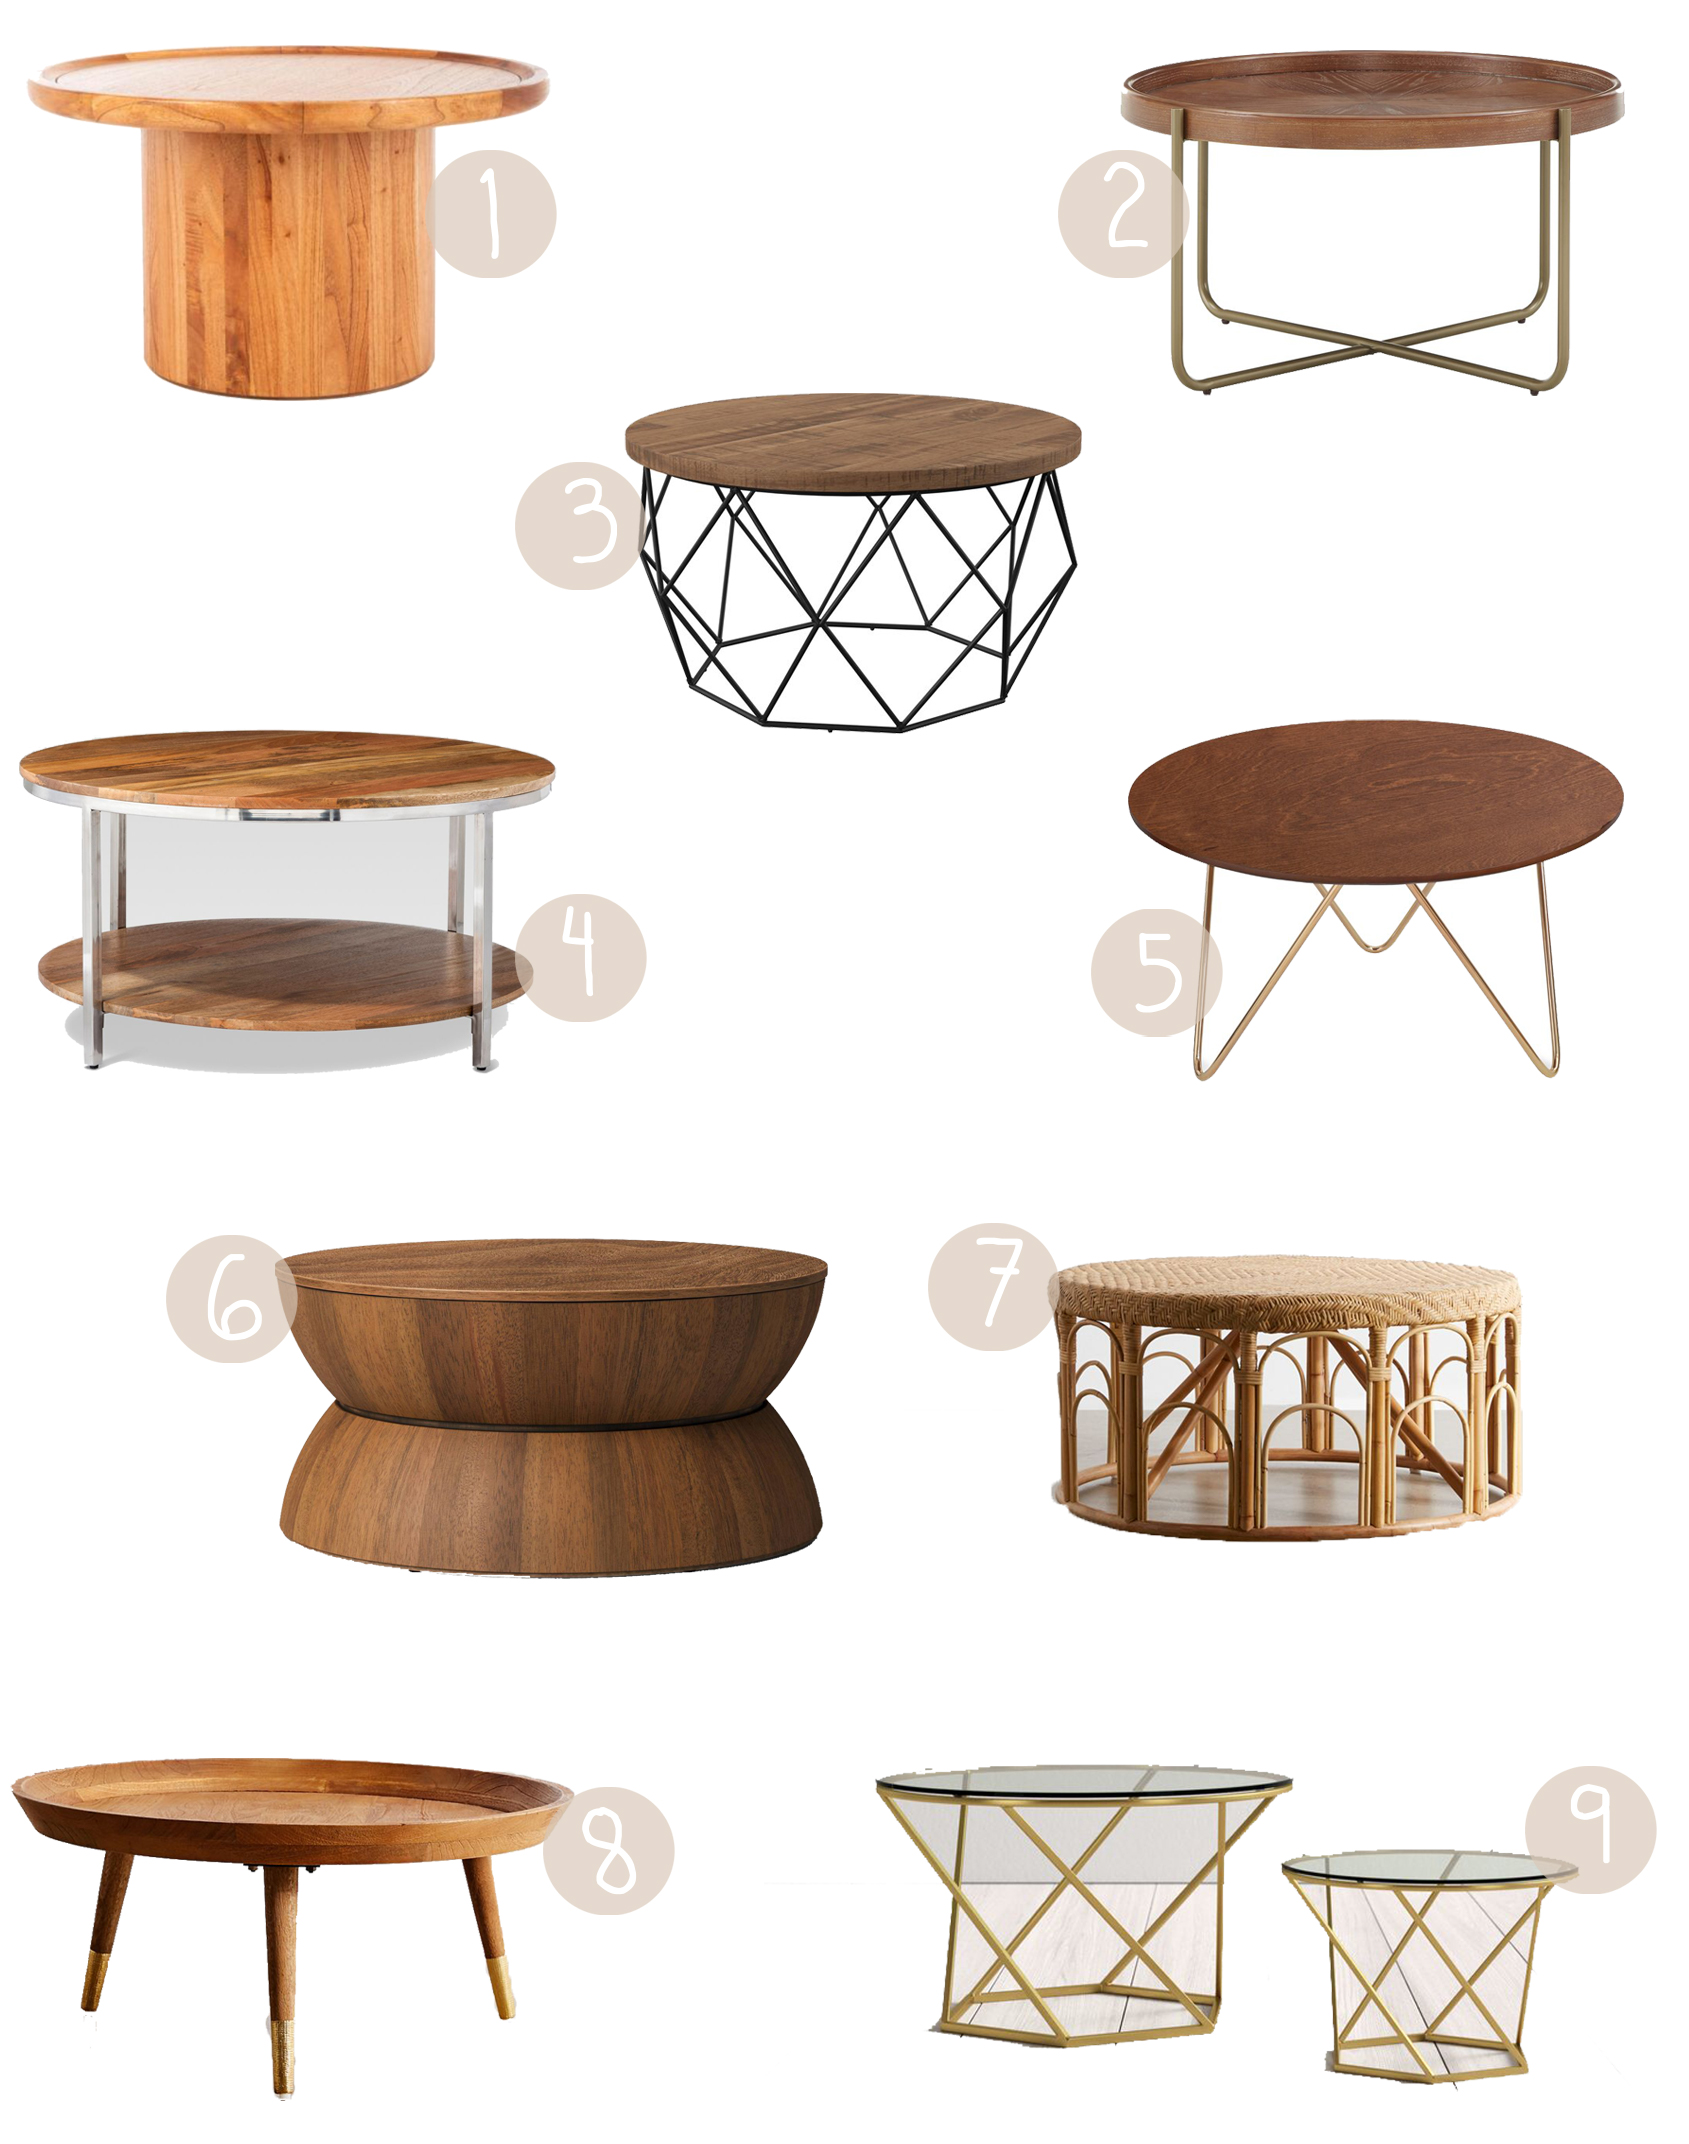 Affordable Coffee Table Roundup - Caitlin Marie Design